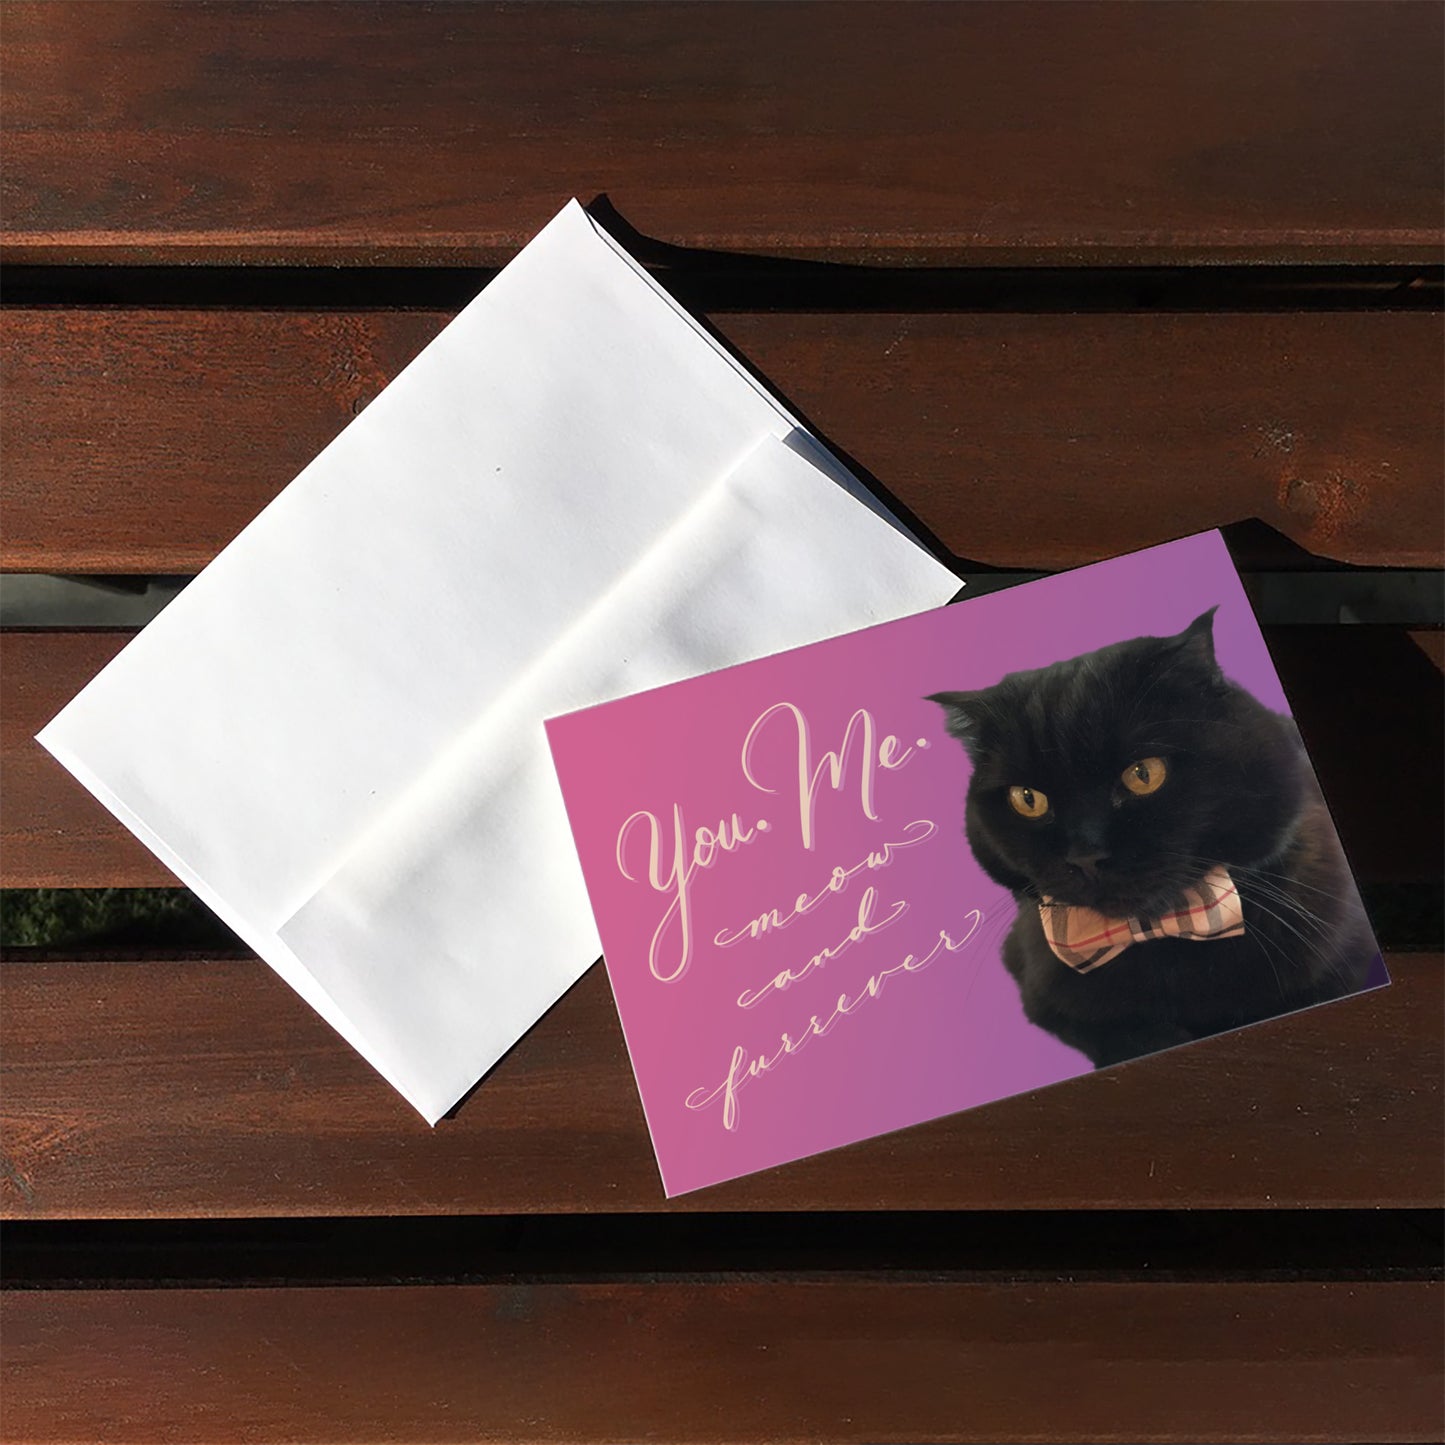 A top view of the greeting card: "You. Me. Meow and Furrever"